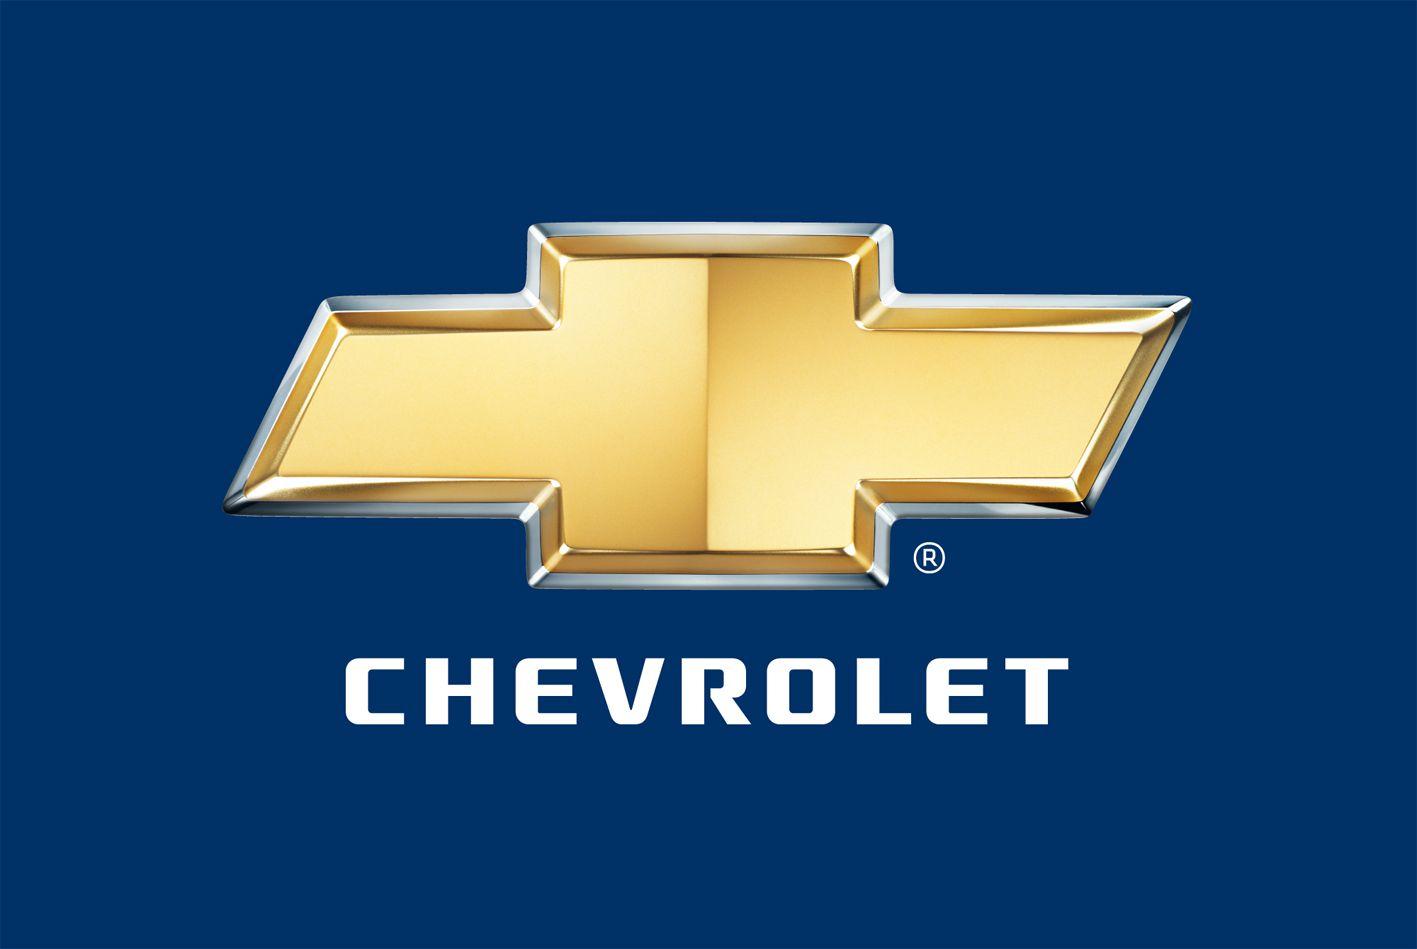 Blue a Logo - Chevy Logo, Chevrolet Car Symbol Meaning and History | Car Brand ...